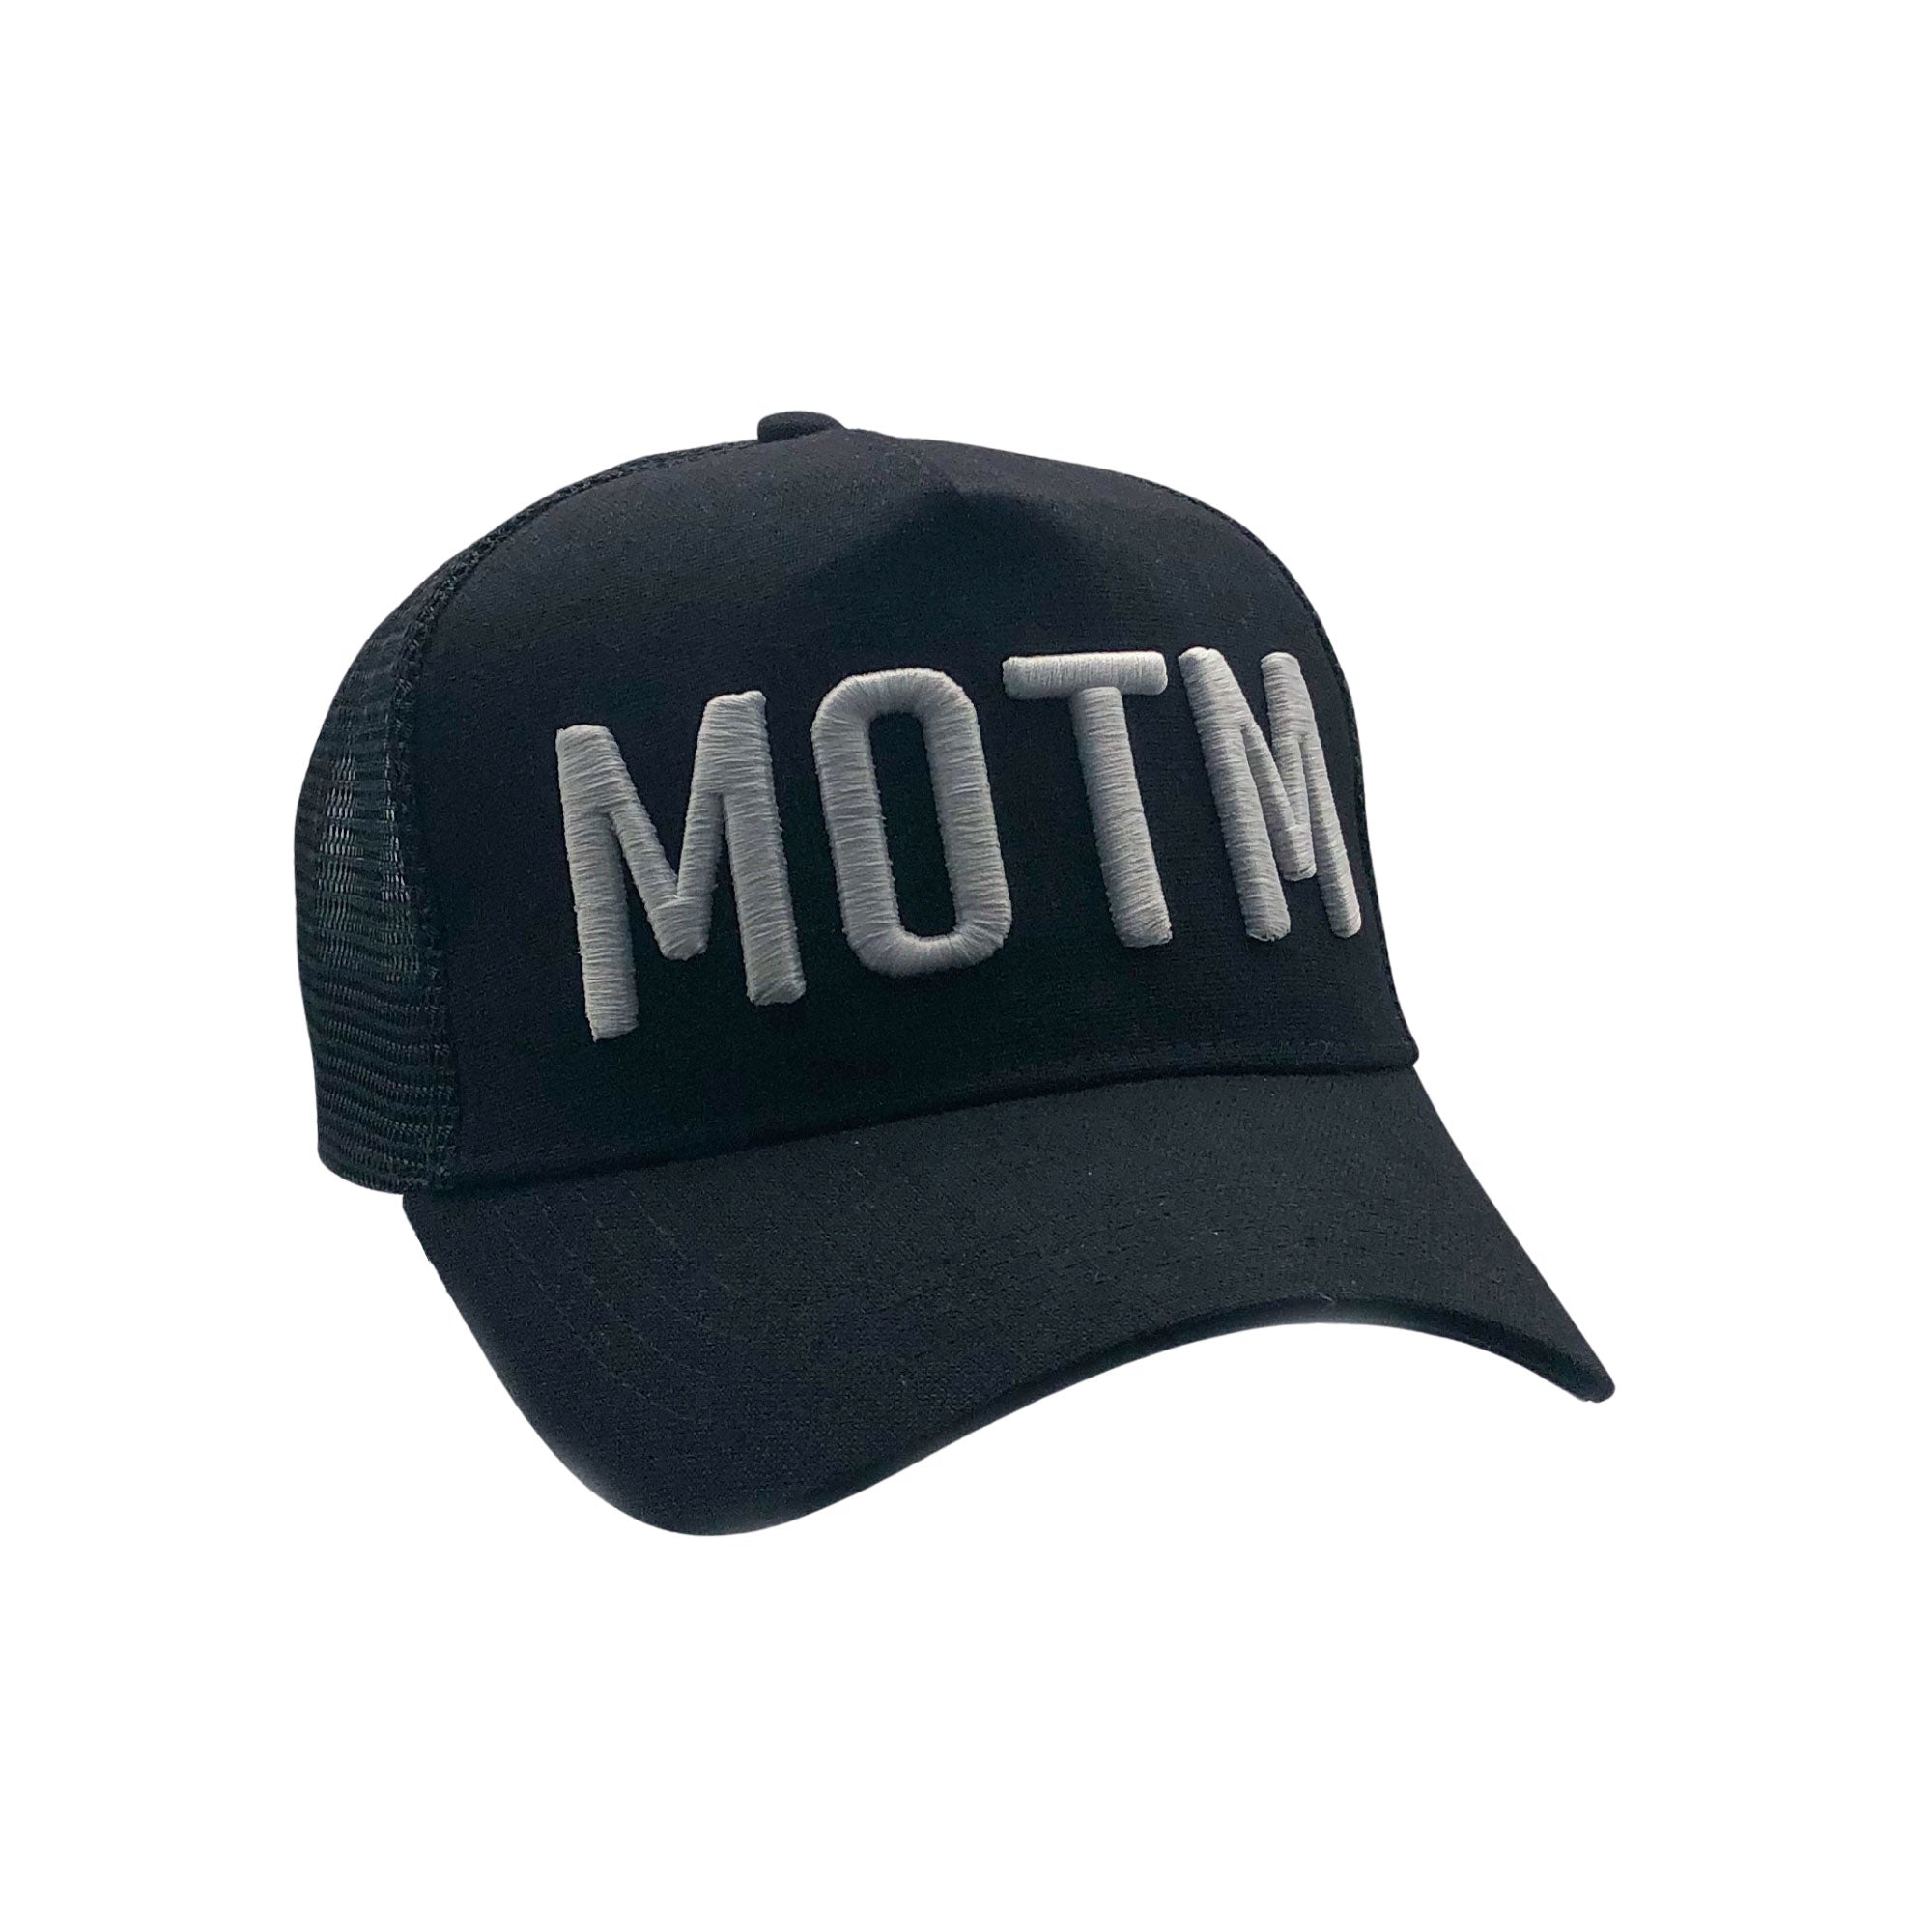 MAN OF THE MATCH® Roberto Carlos Official Cap - MOTM 3D Embroidered White on Black - Premium Linen